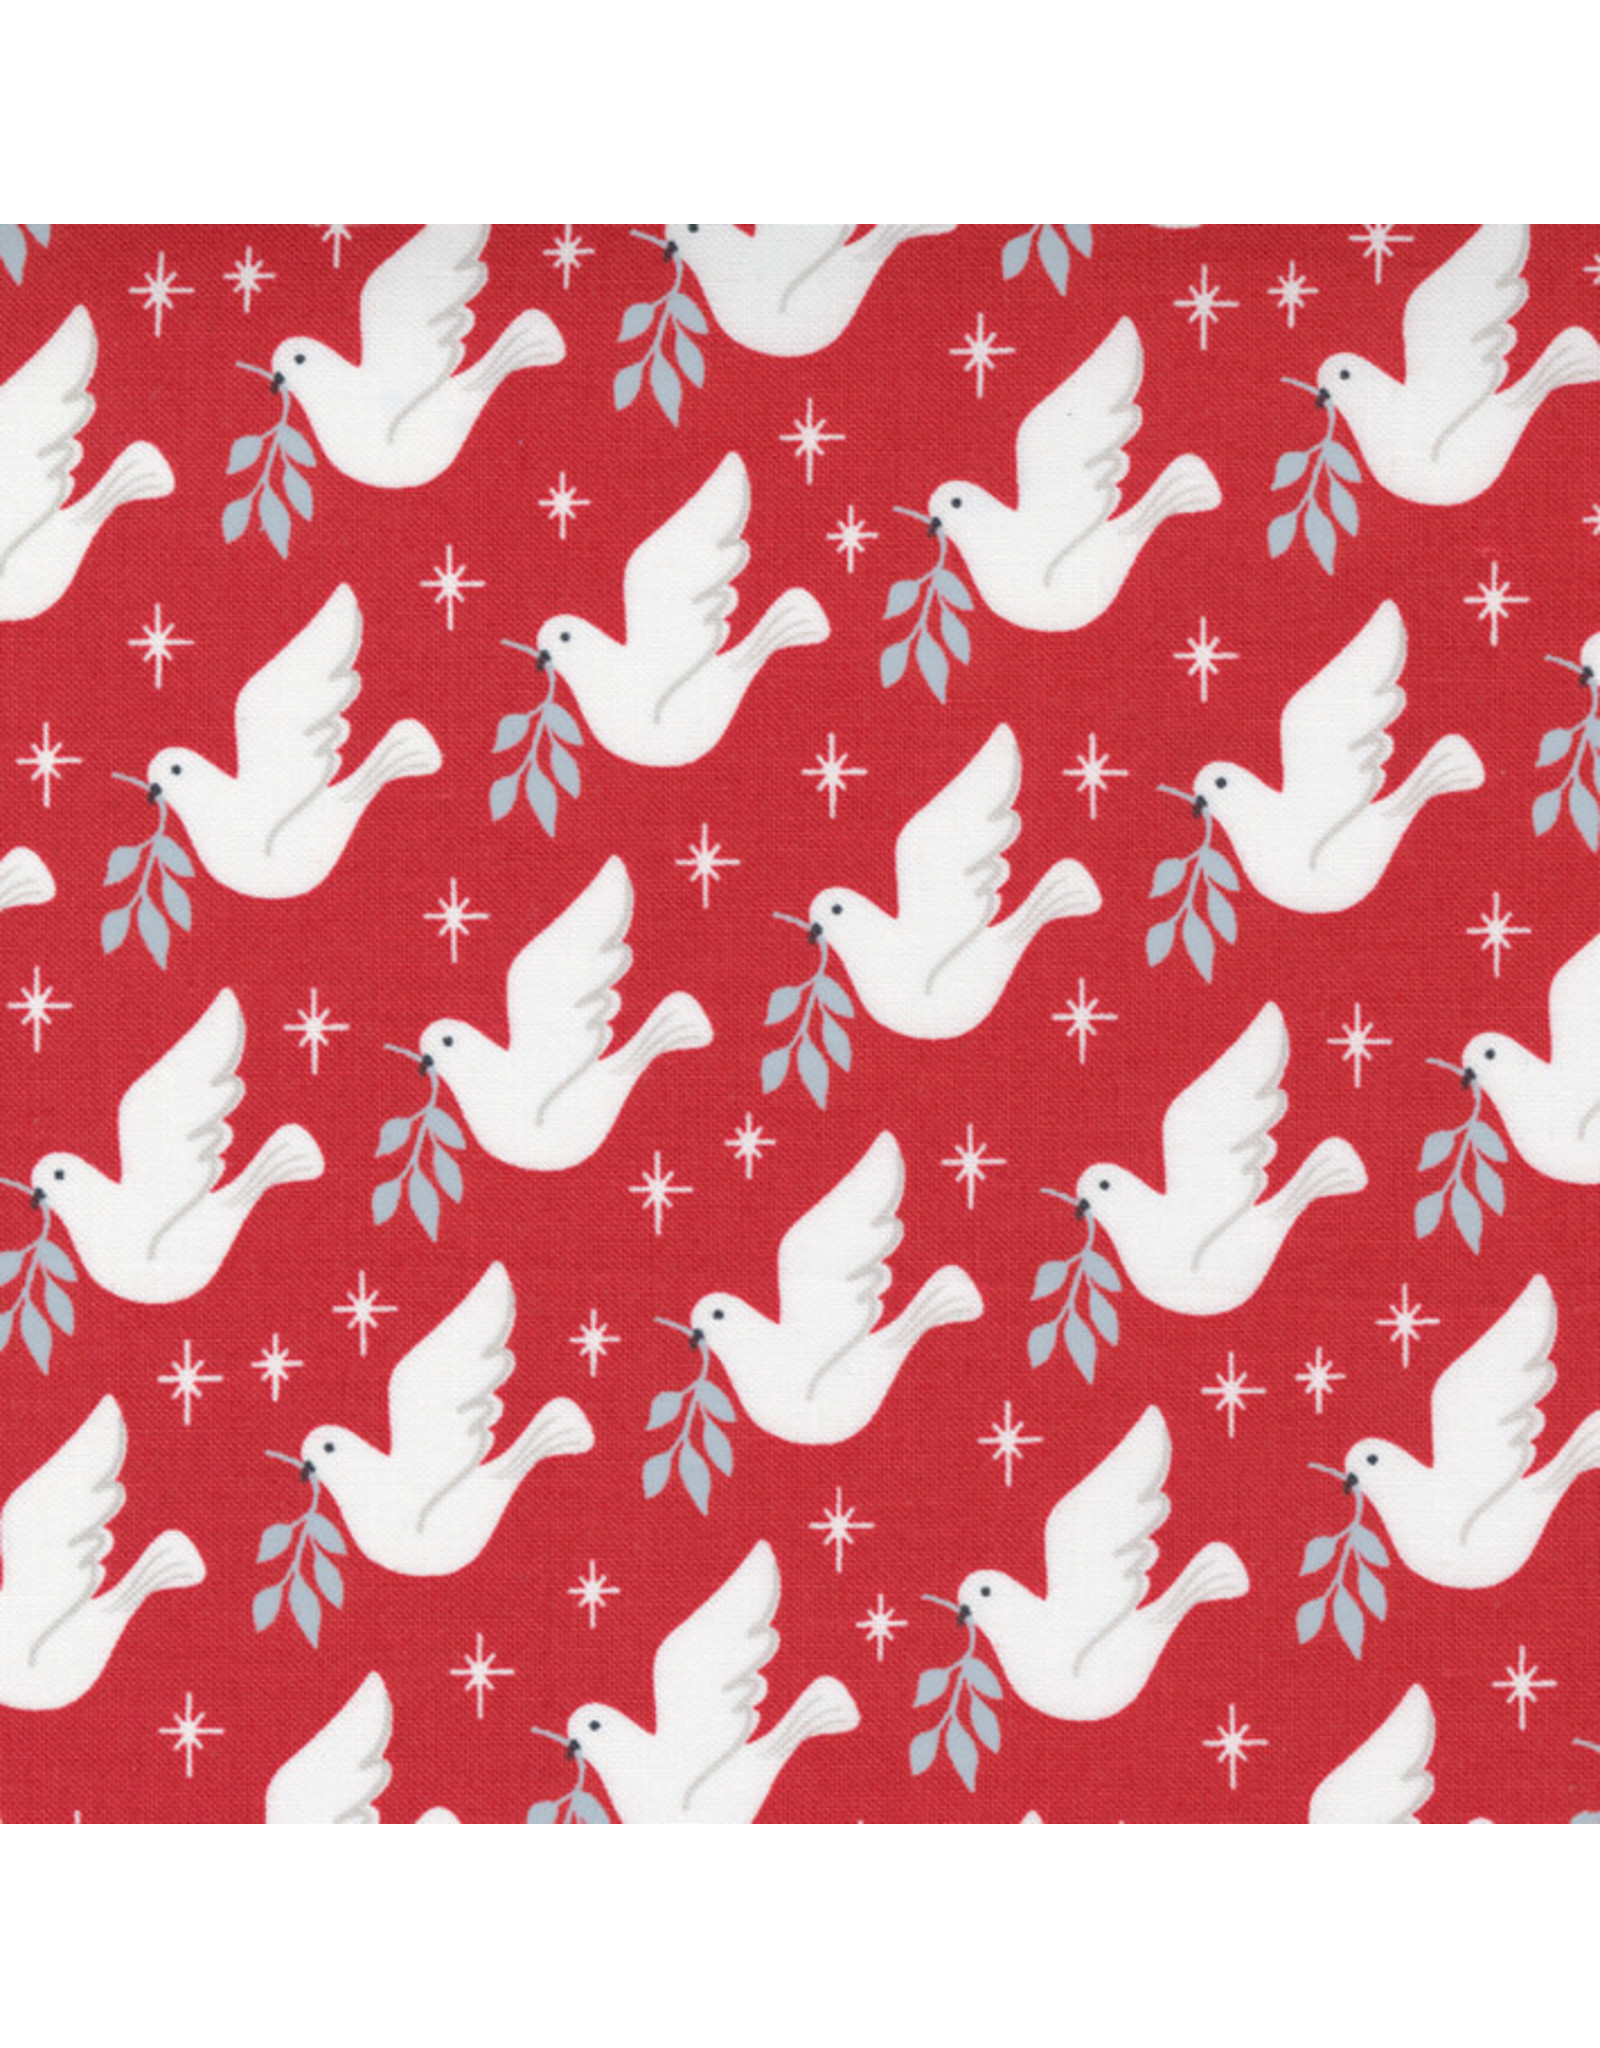 Moda Christmas Morning, Lovey Dovey in Cranberry, Fabric Half-Yards